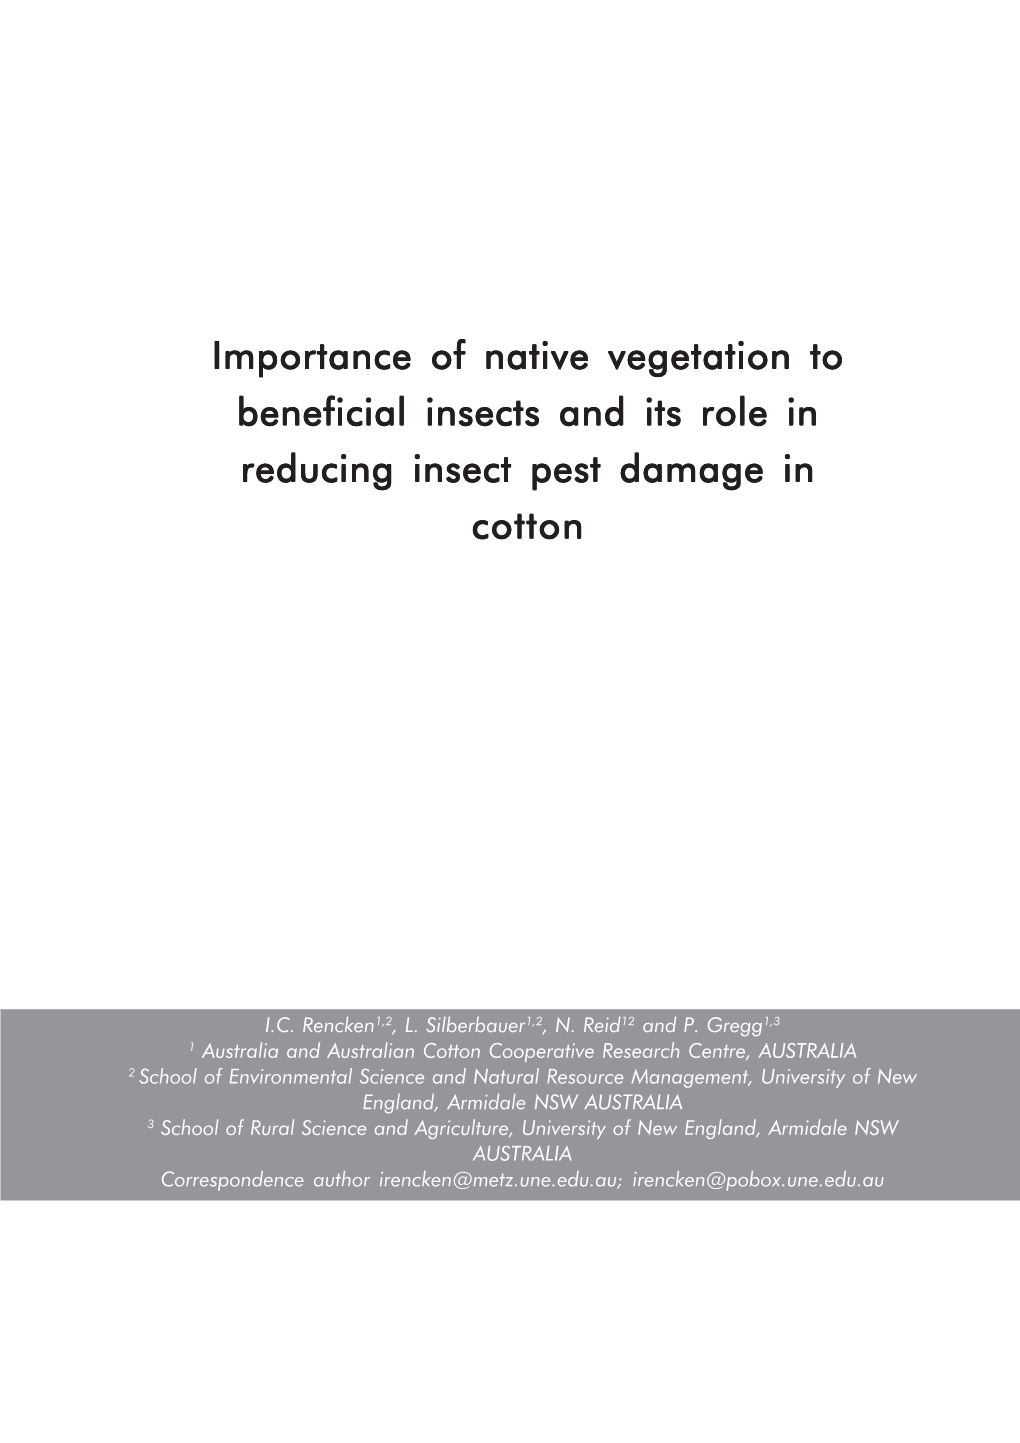 Importance of Native Vegetation to Beneficial Insects and Its Role in Reducing Insect Pest Damage in Cotton